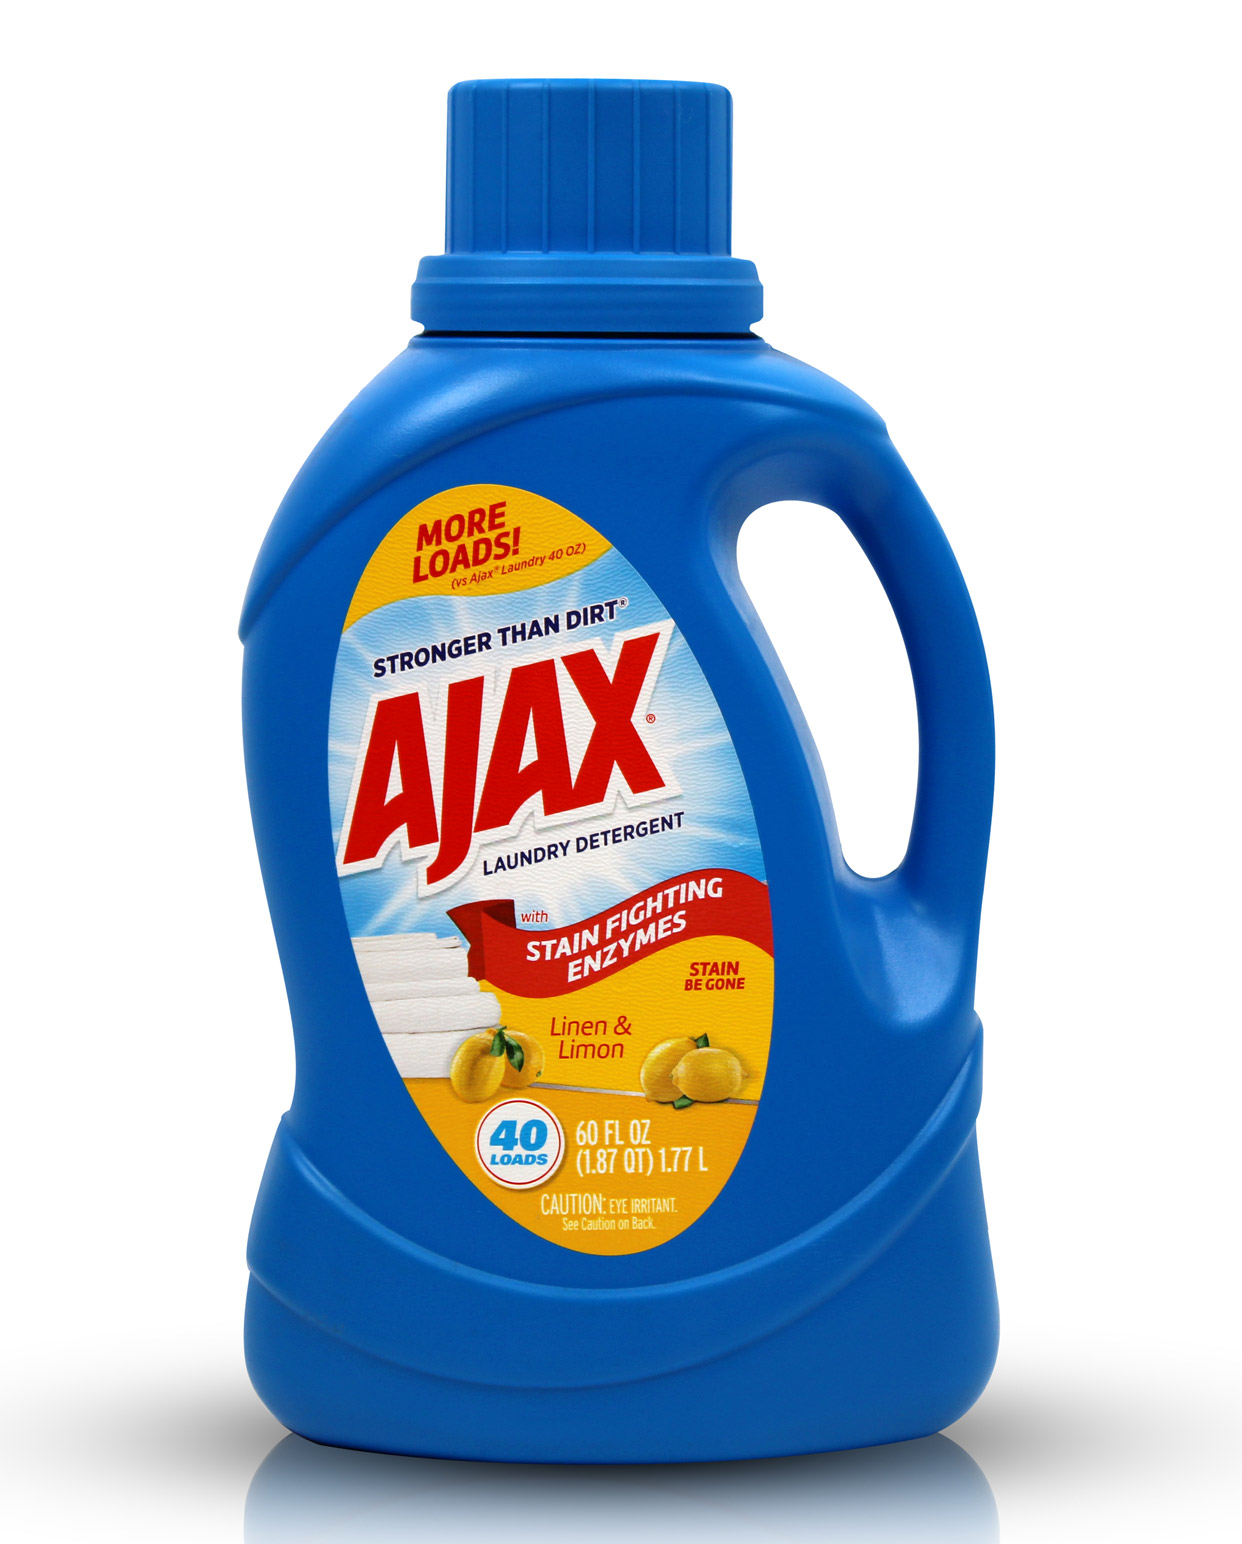 60oz bottle of AJAX Stain Fighting Laundry Detergent with Enzymes with a clear label.